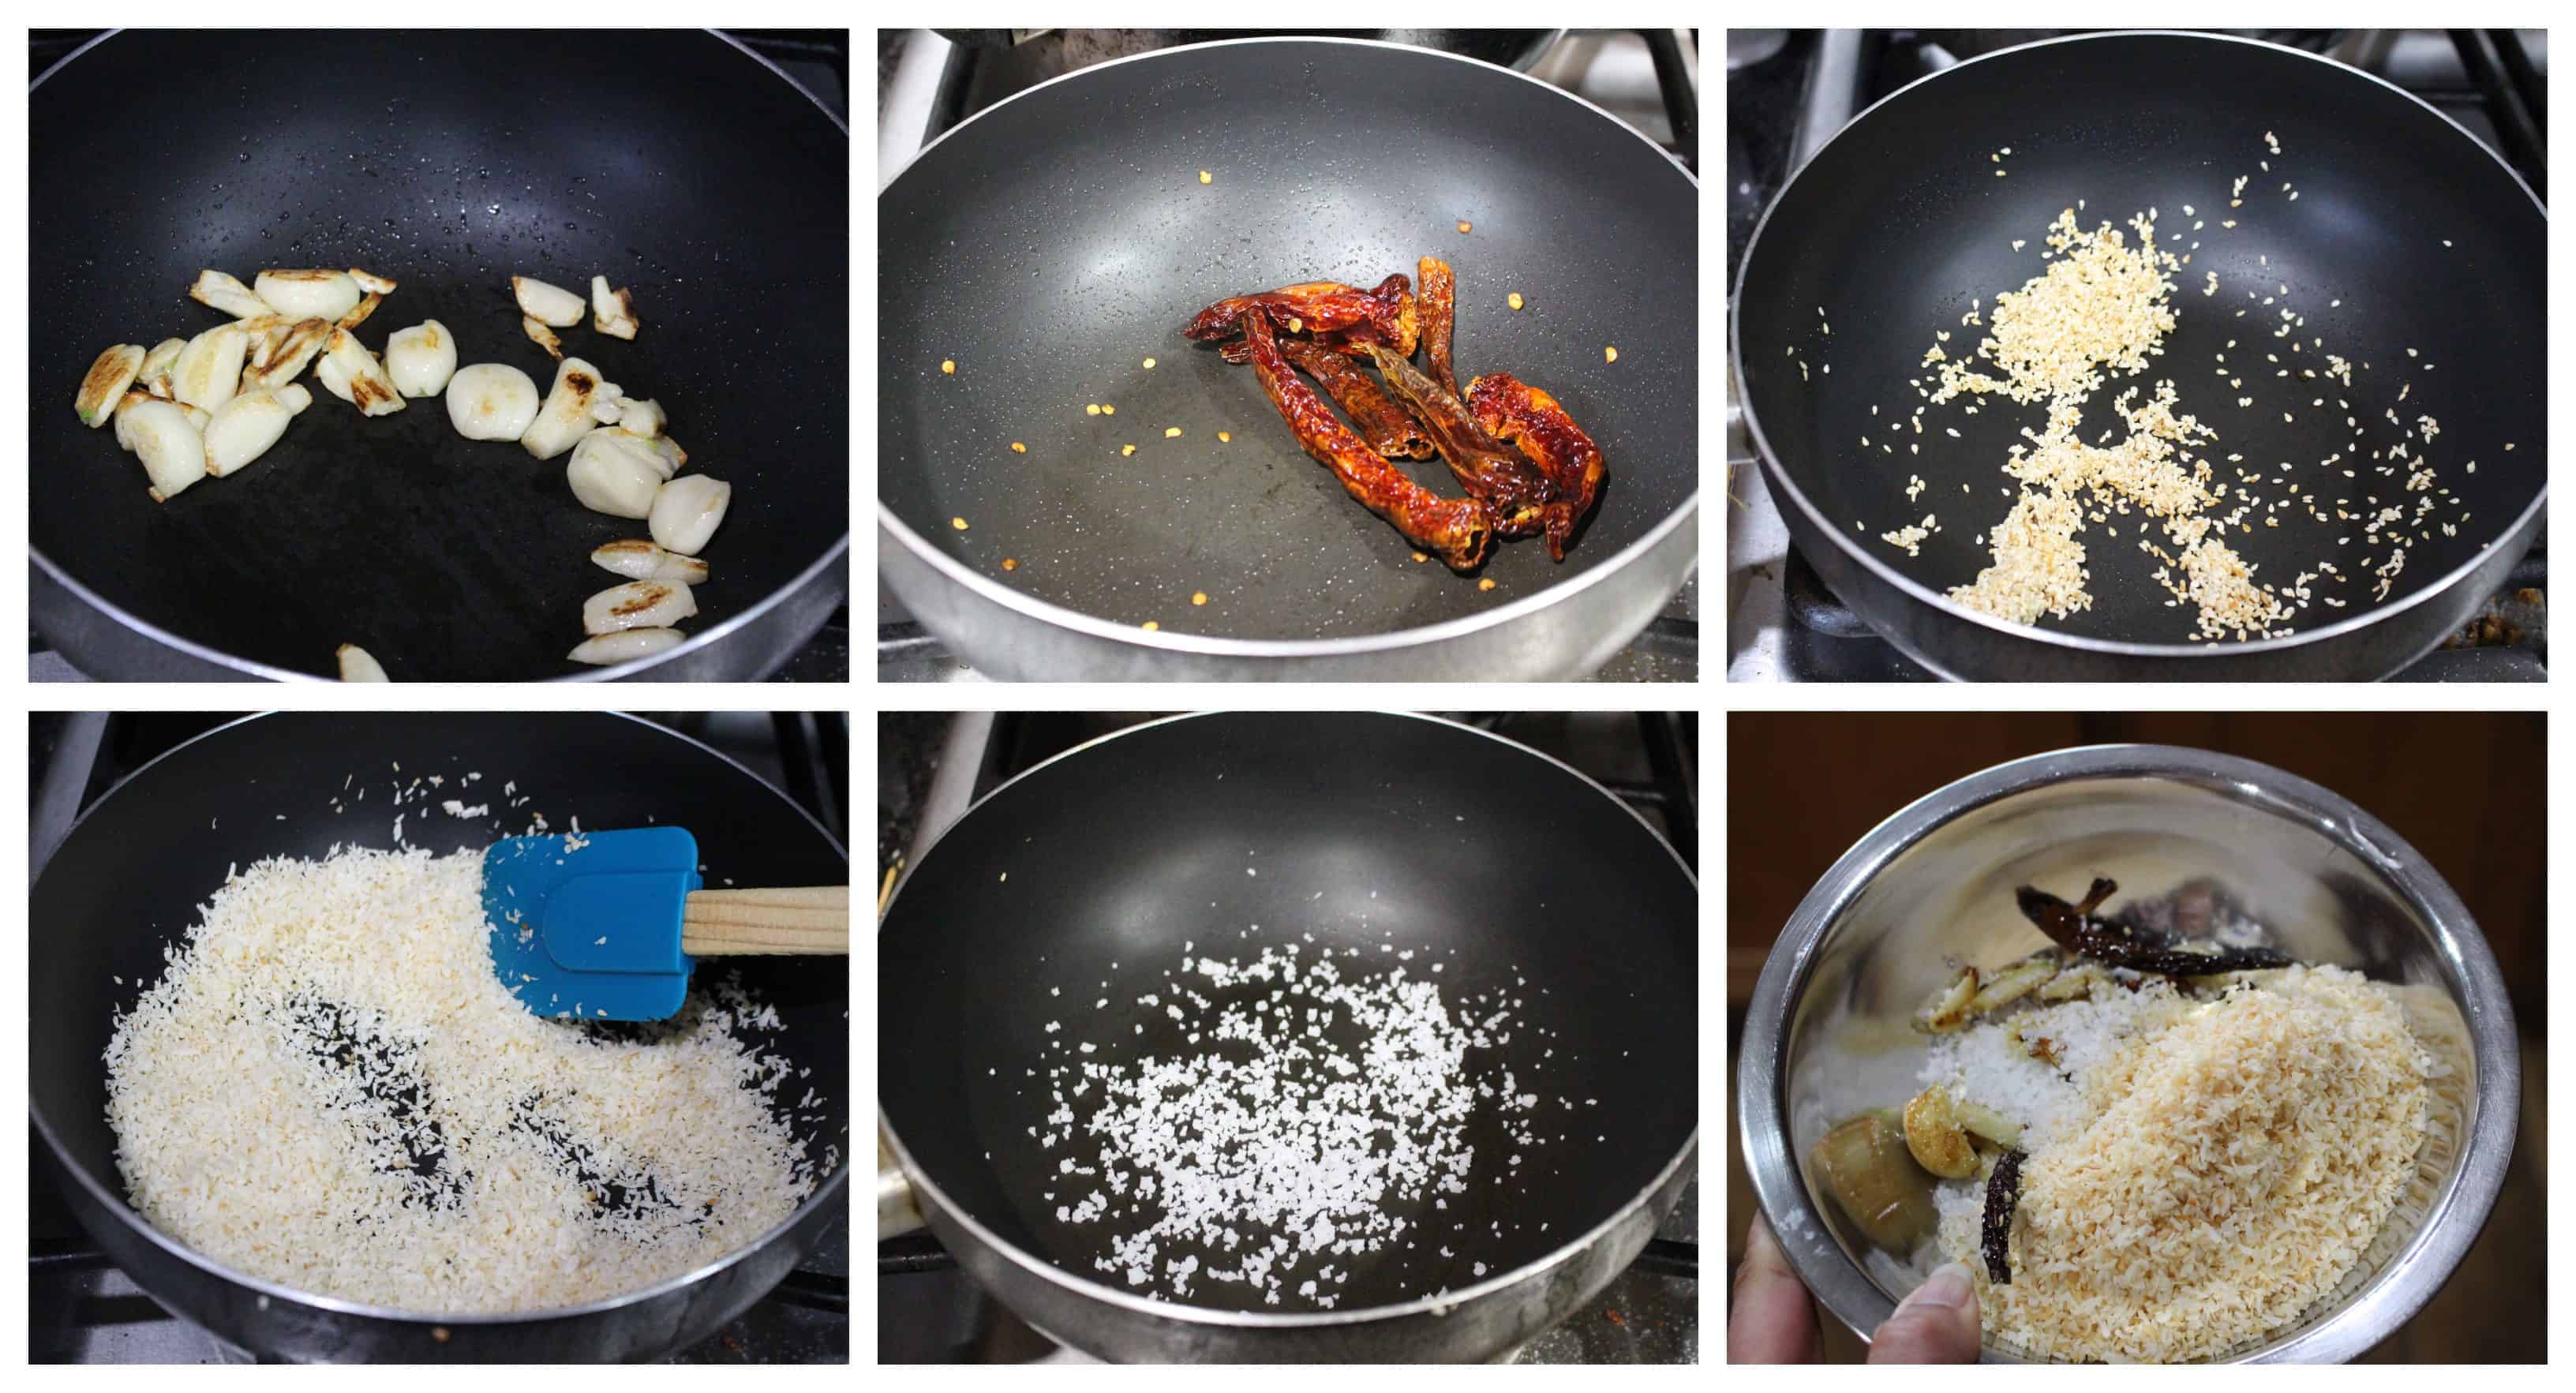 process shot to fry ingredients like red chili, garlic, coconut and sesame